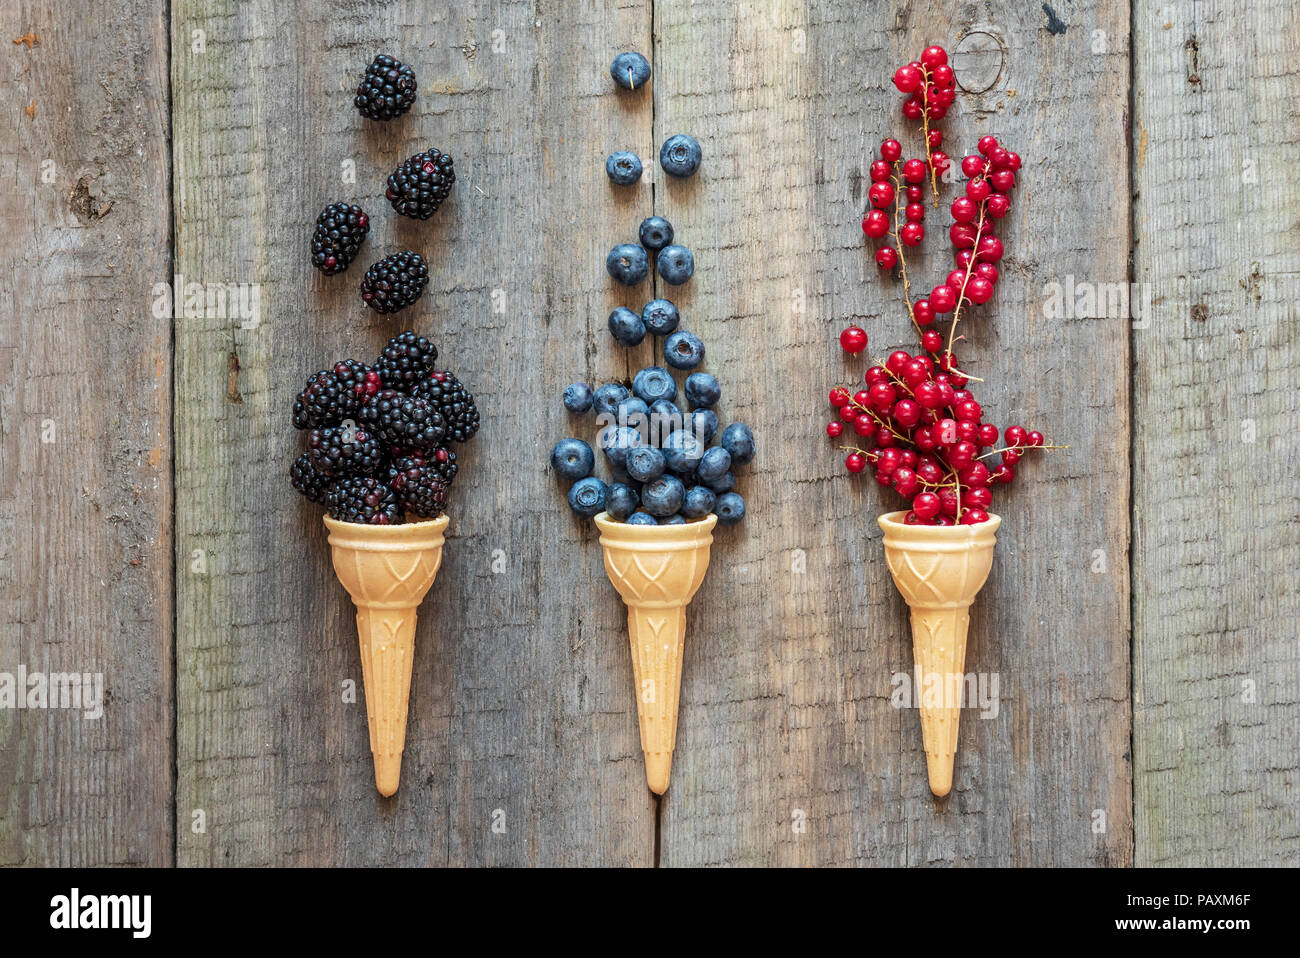 Berries in ice cream cones (blackberry, blueberry, redcurrant). Healthy summer food concept. Stock Photo